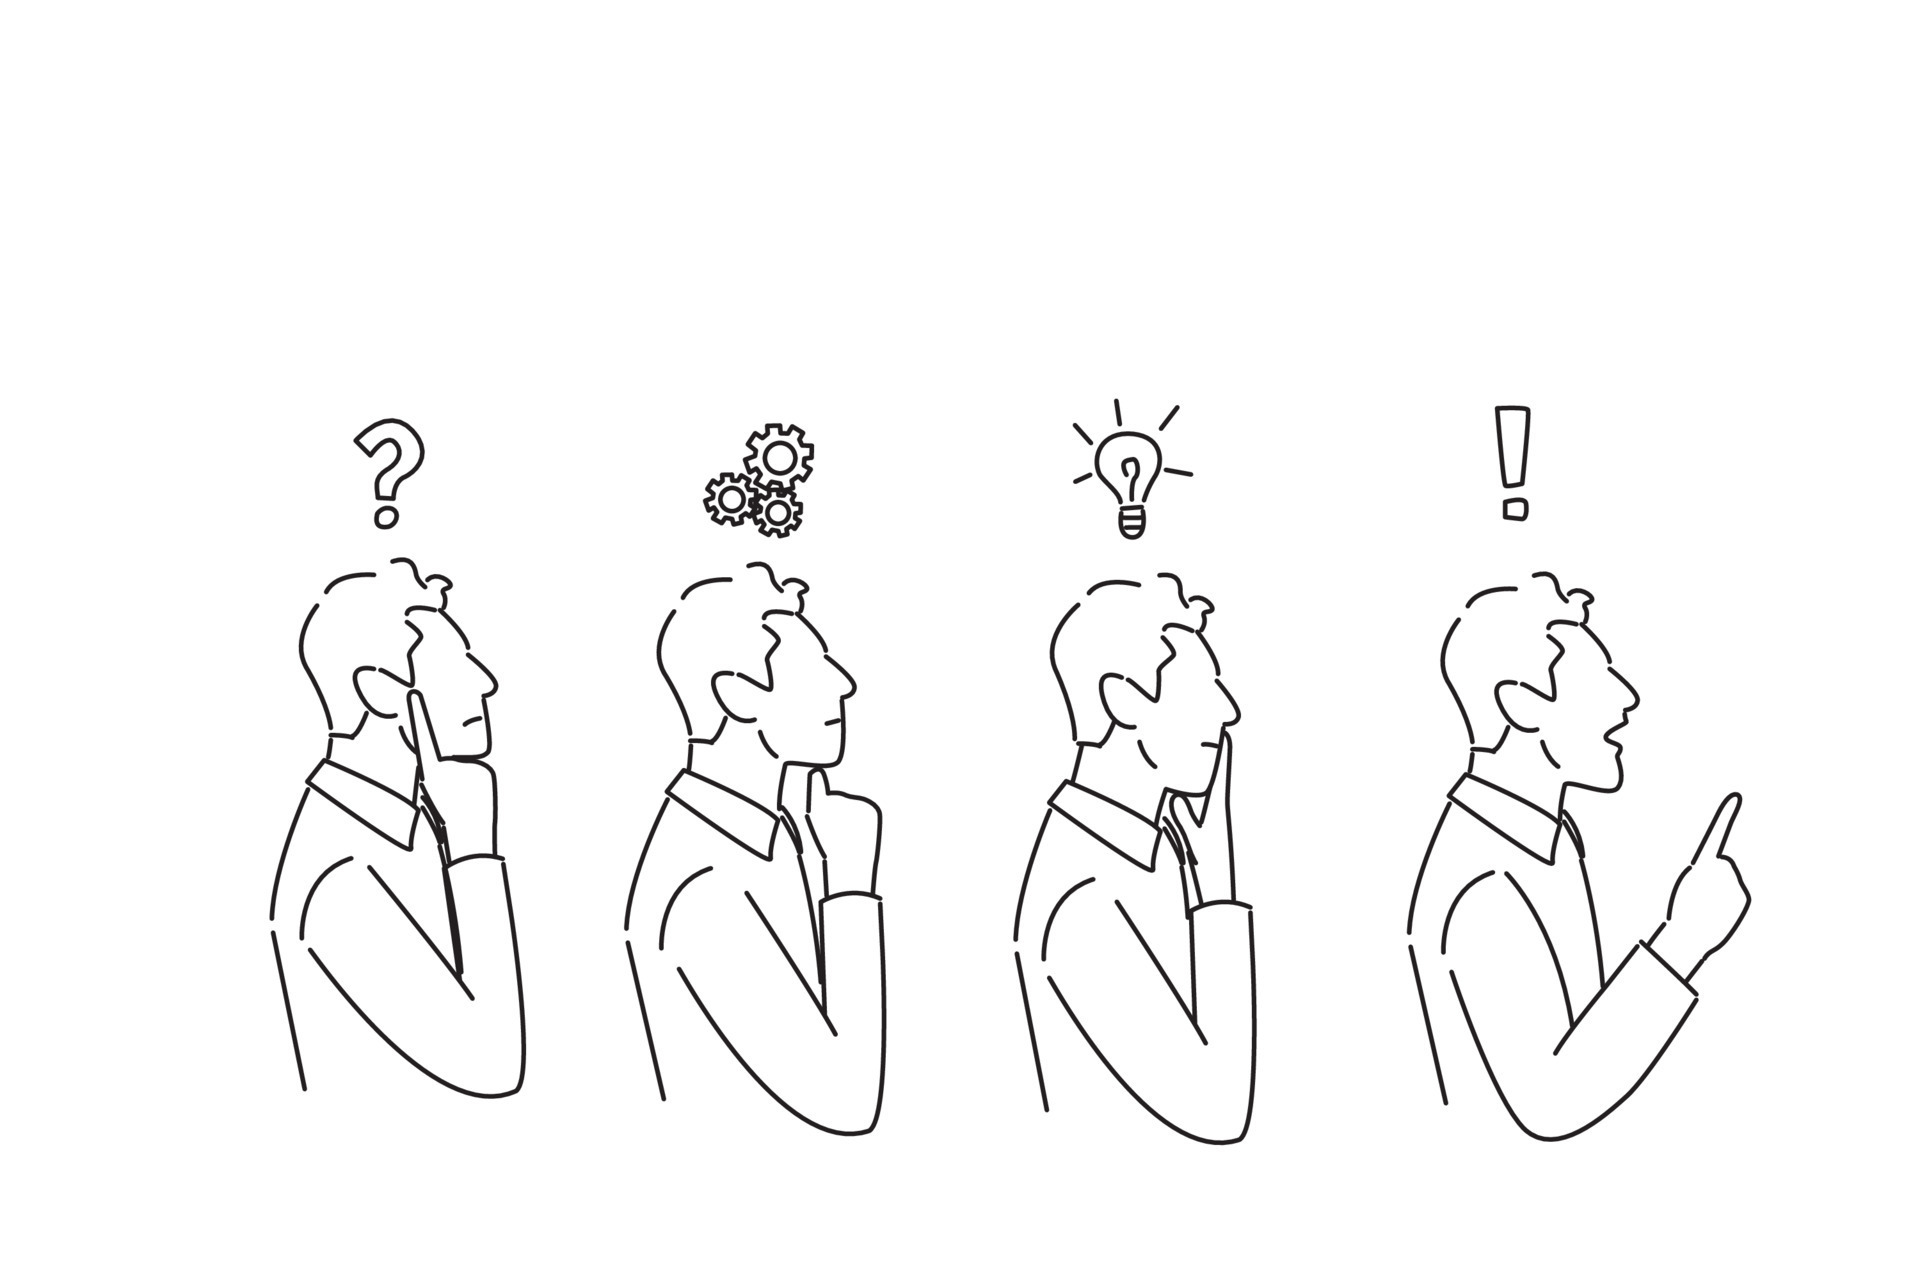 https://static.vecteezy.com/system/resources/previews/009/194/138/original/drawing-of-side-view-of-a-thoughtful-thinking-finding-solution-man-with-gear-mechanism-vector.jpg